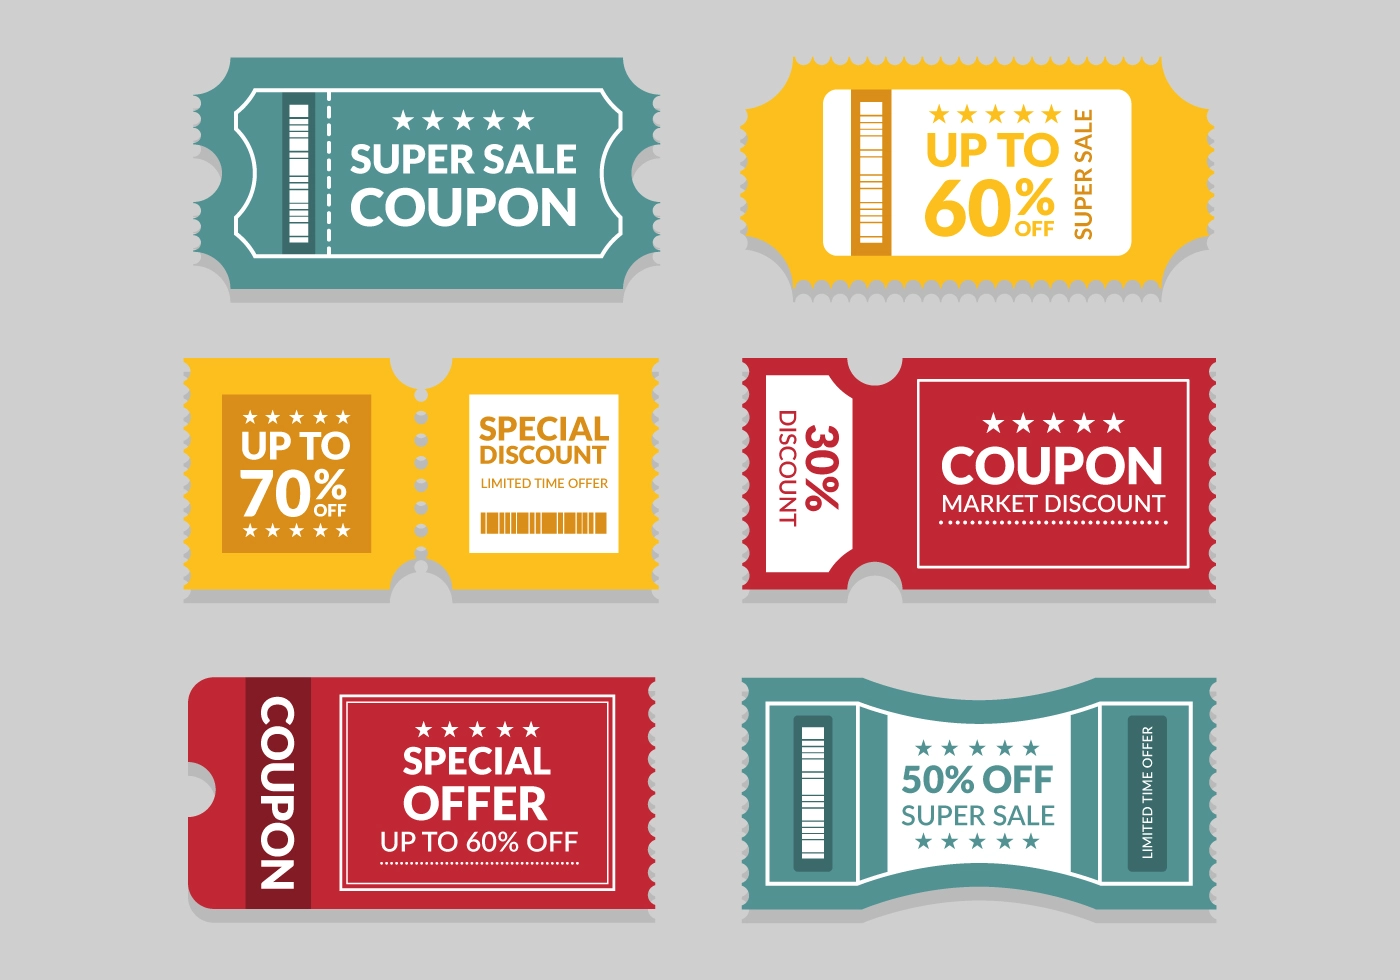 How to Uncover the Greatest Online Promo Codes and Discounts for Tremendous Savings?